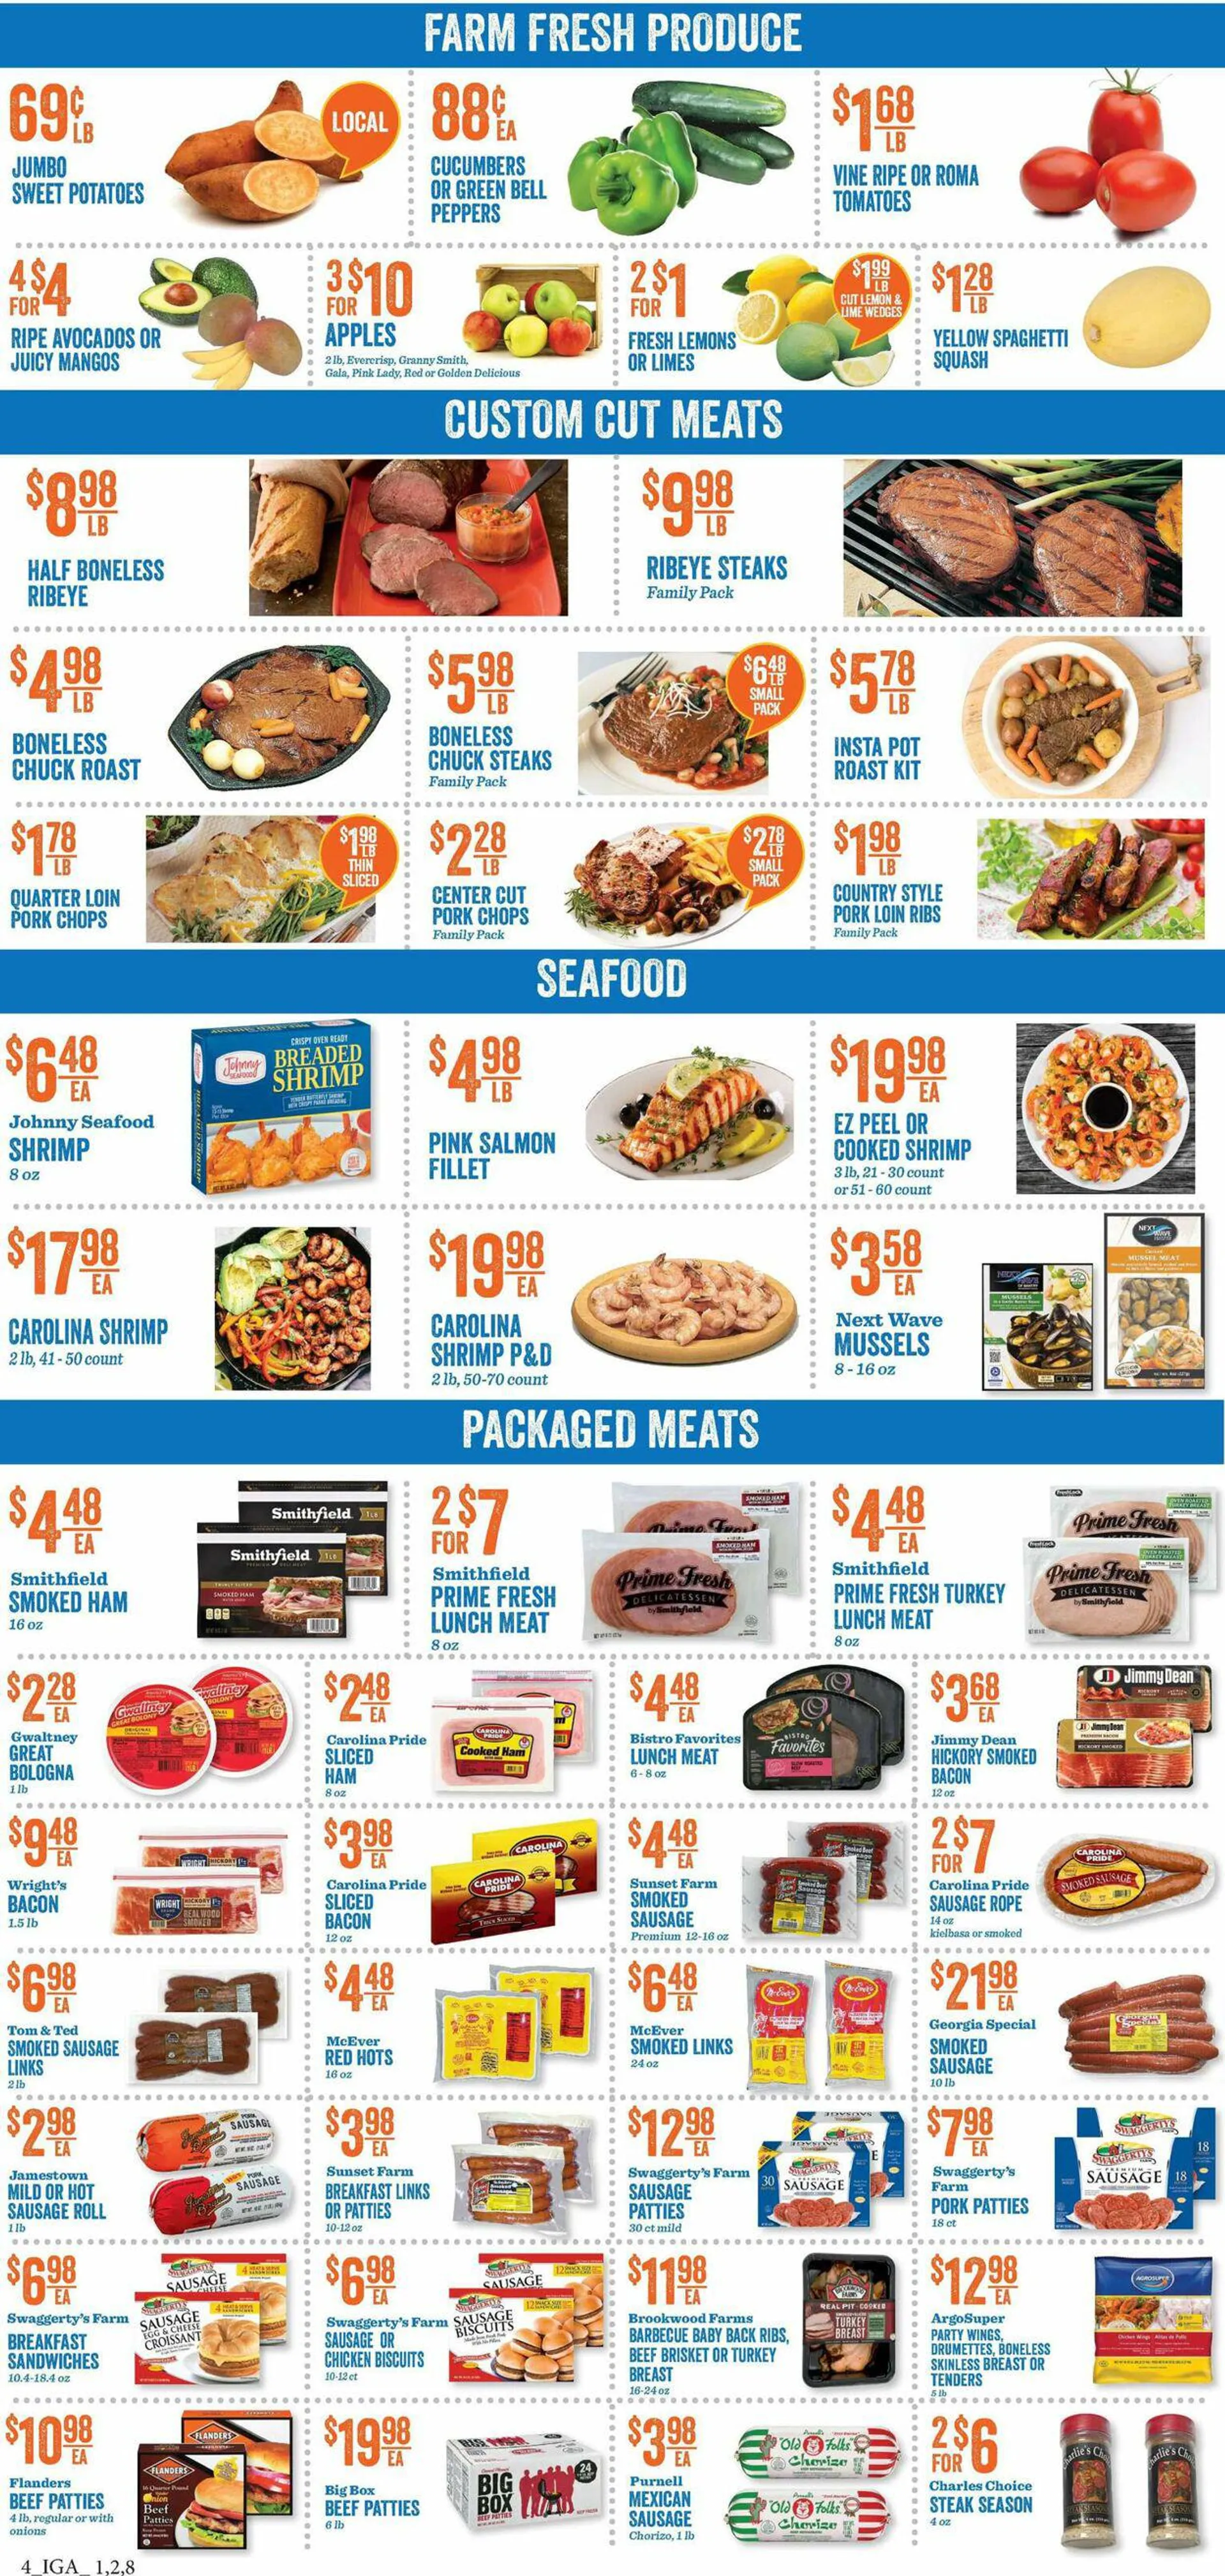 KJ´s Market Current weekly ad - 3